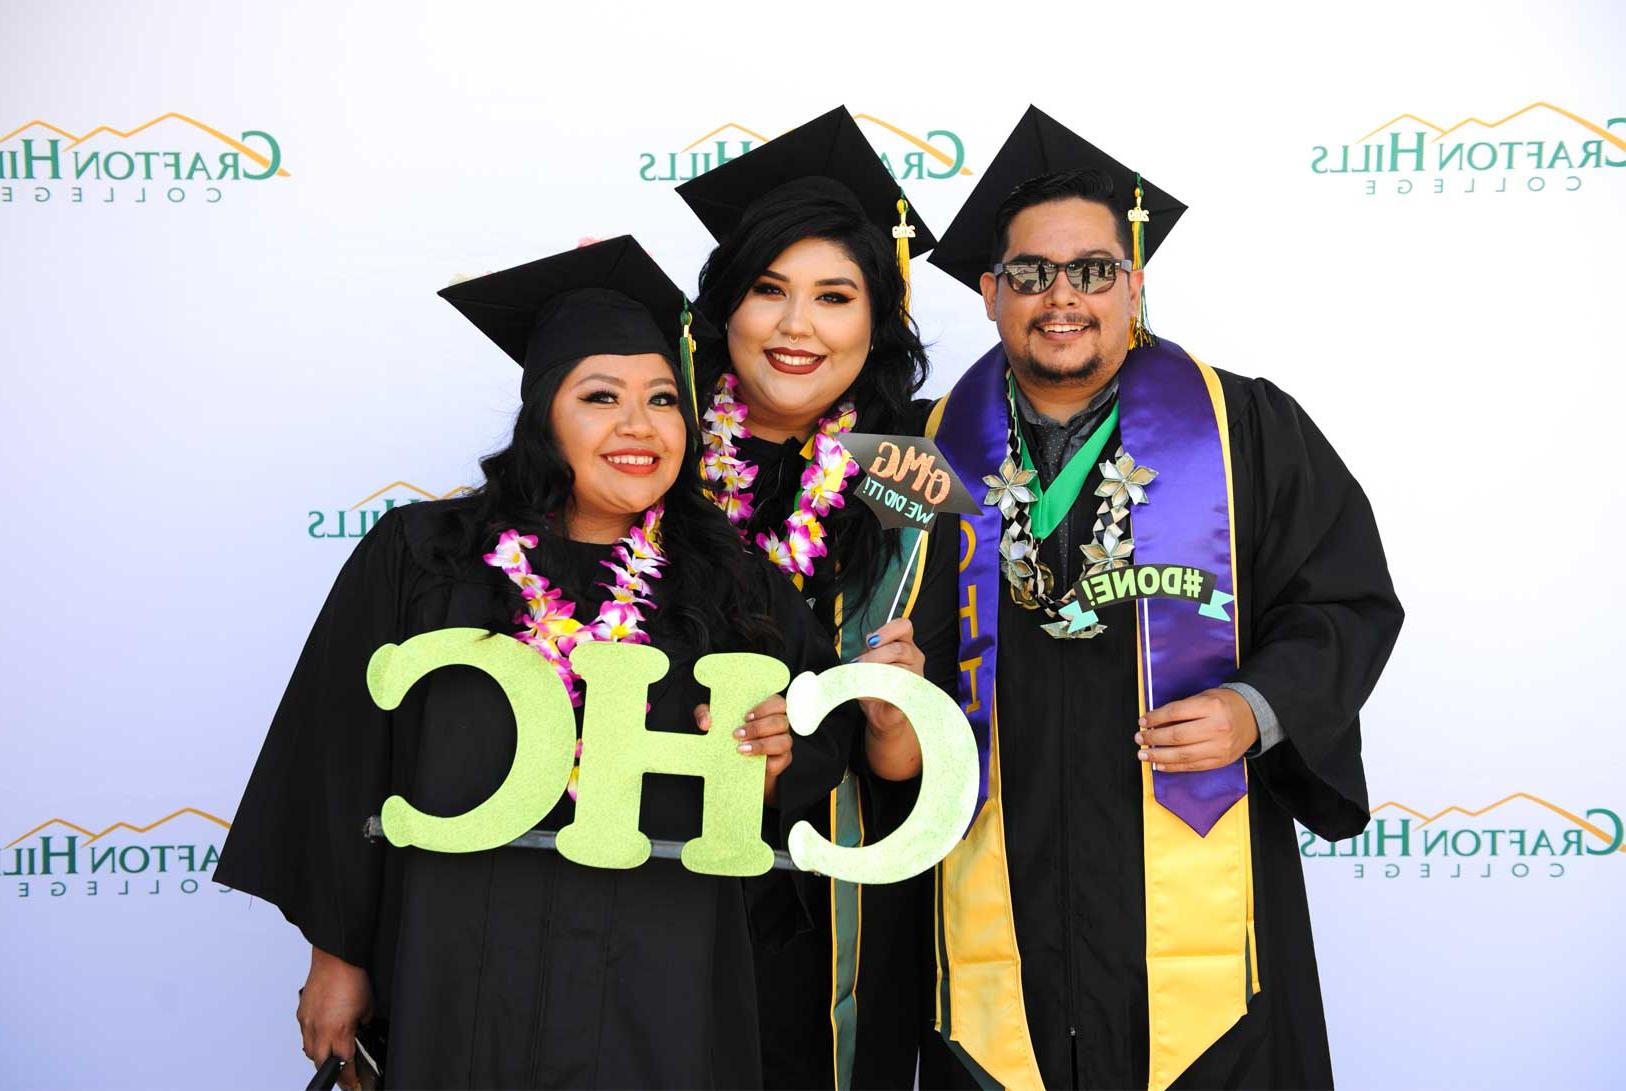 Students holding CHC lettering, wearing regalia